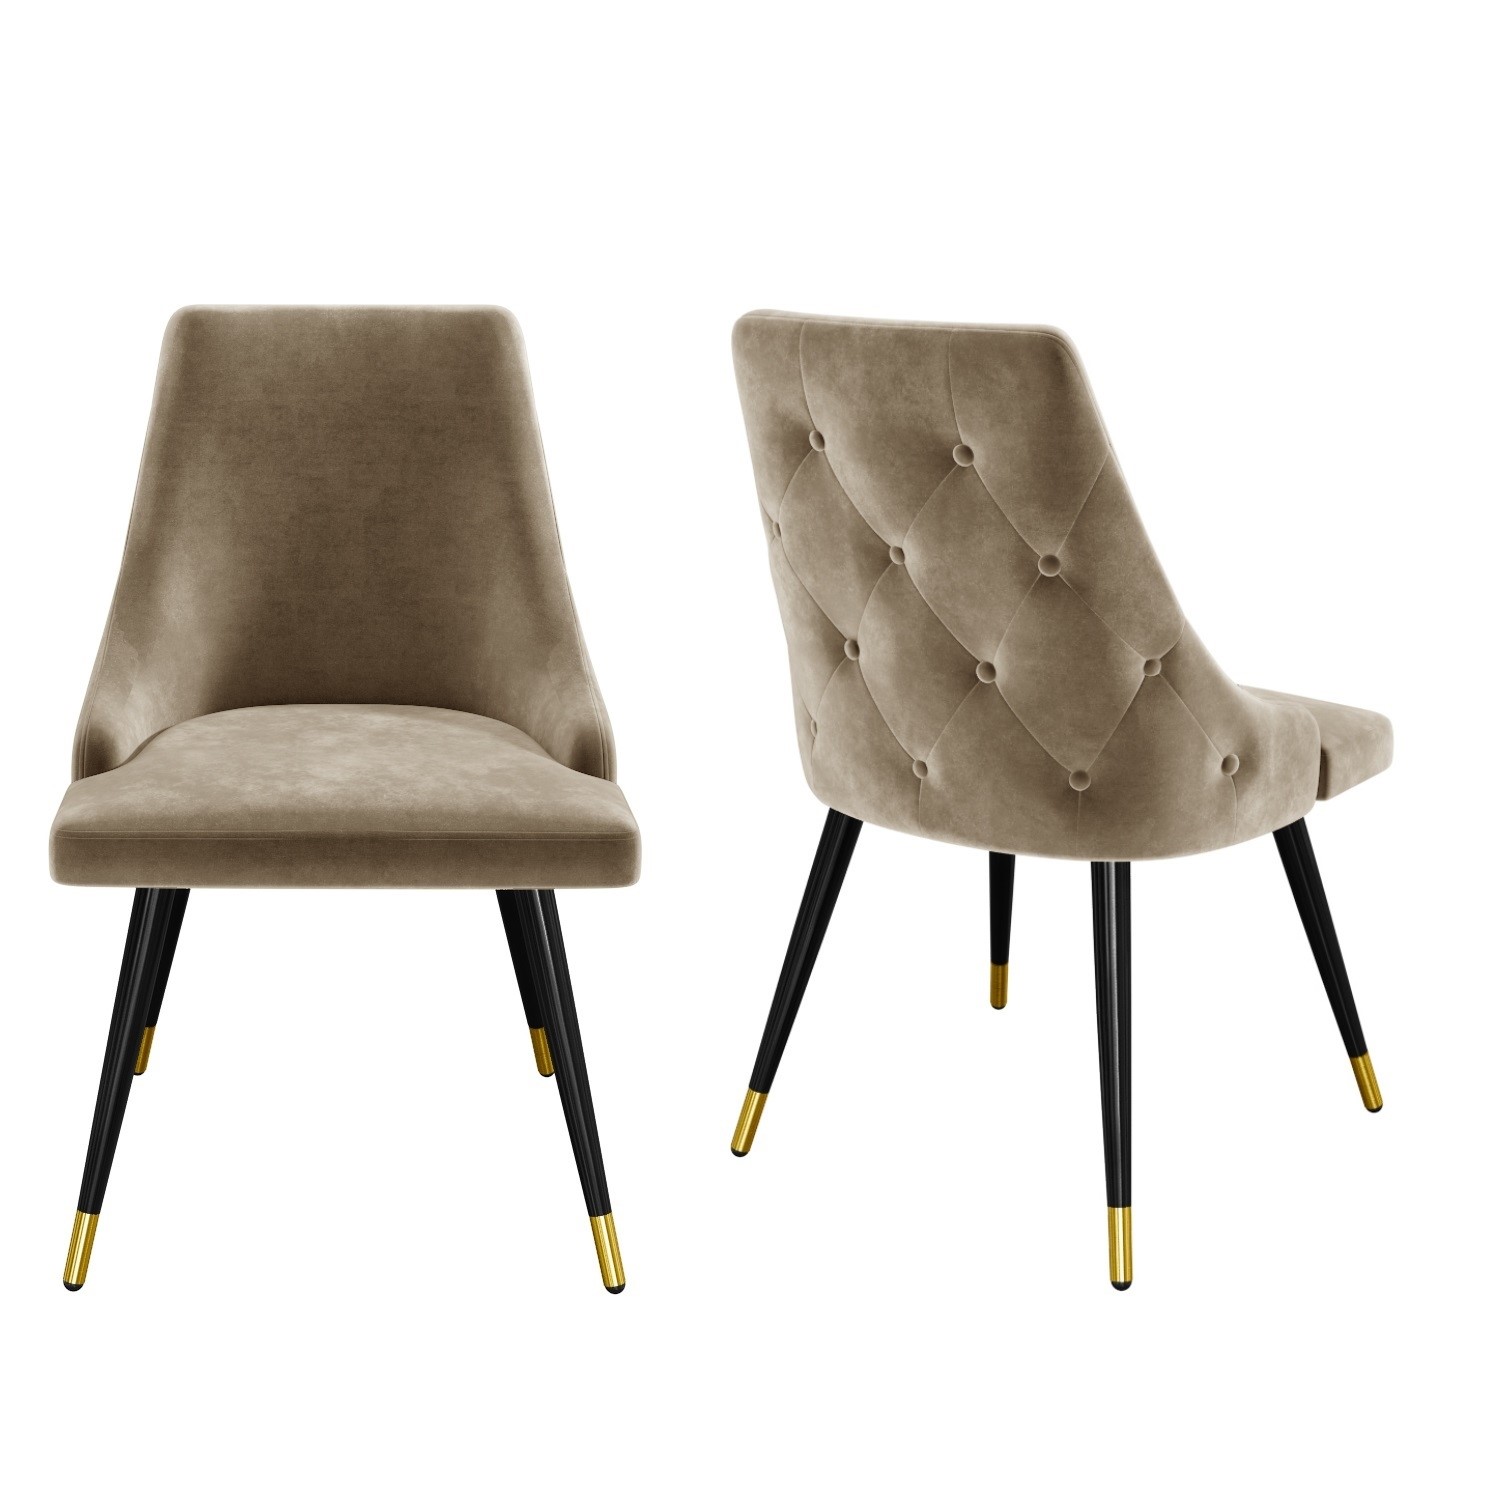 Pair of Beige Velvet Dining Chairs with Button Back & Black Legs